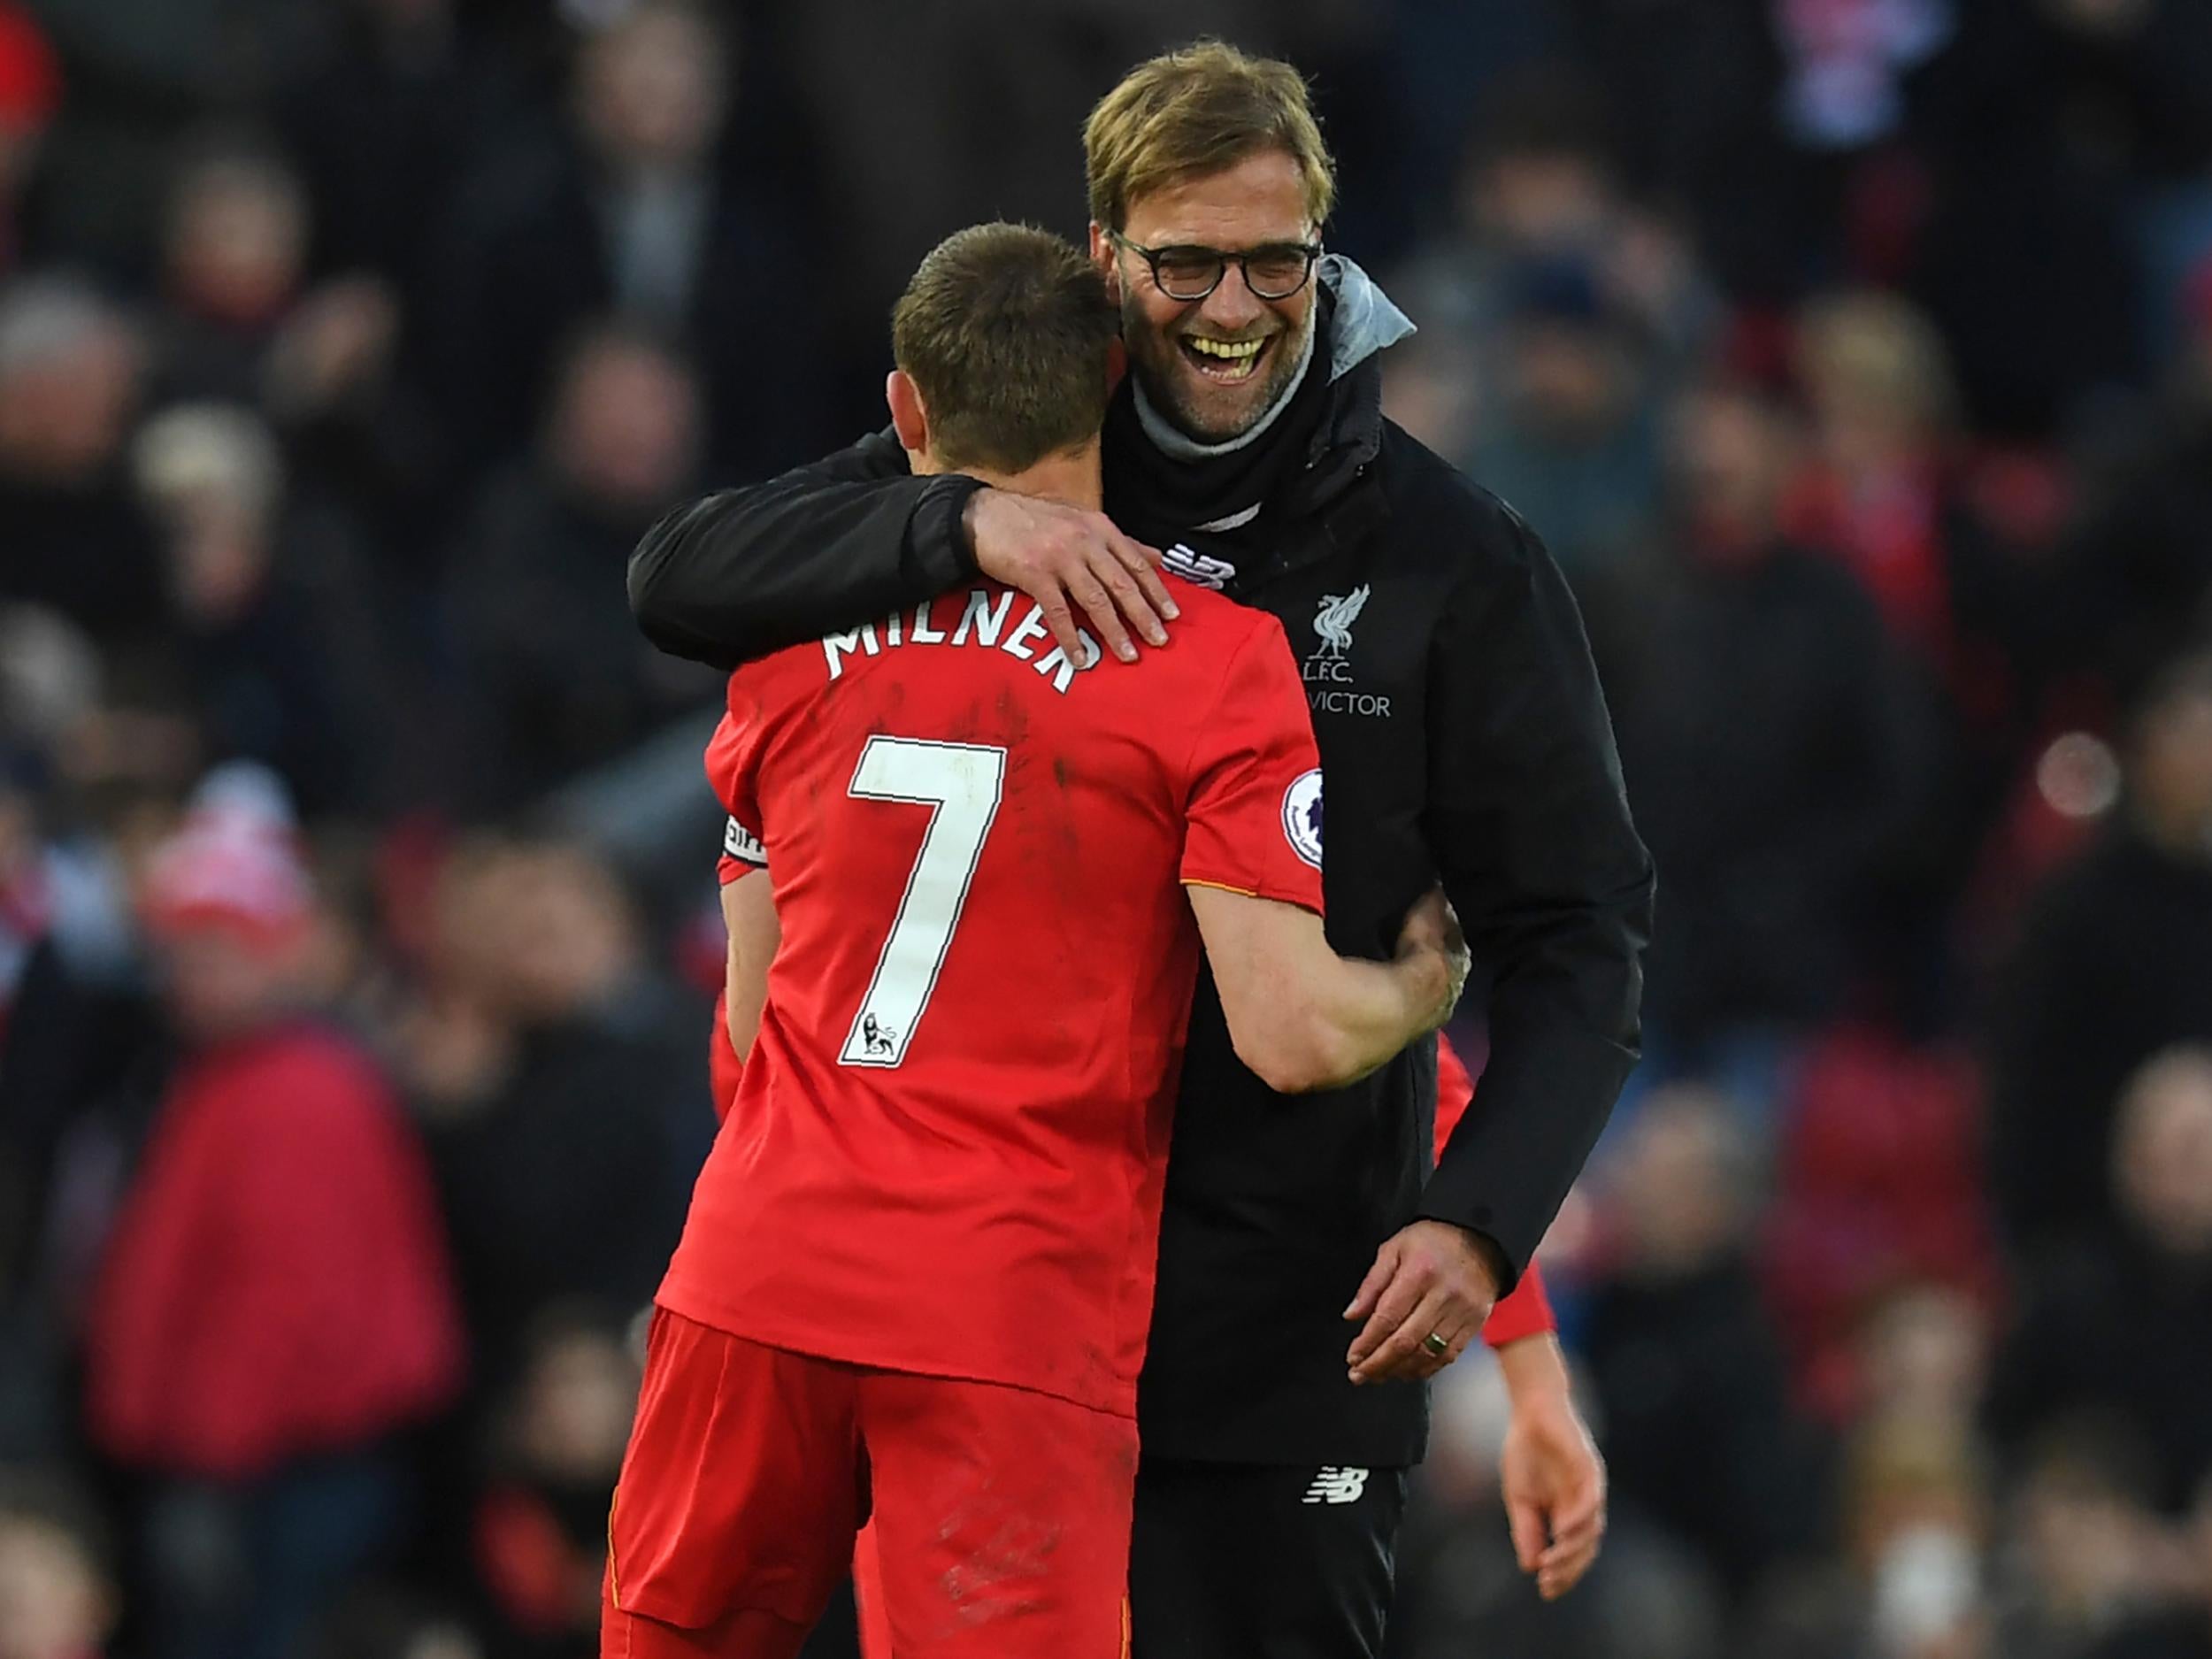 Liverpool came from behind to beat Burnley 2-1